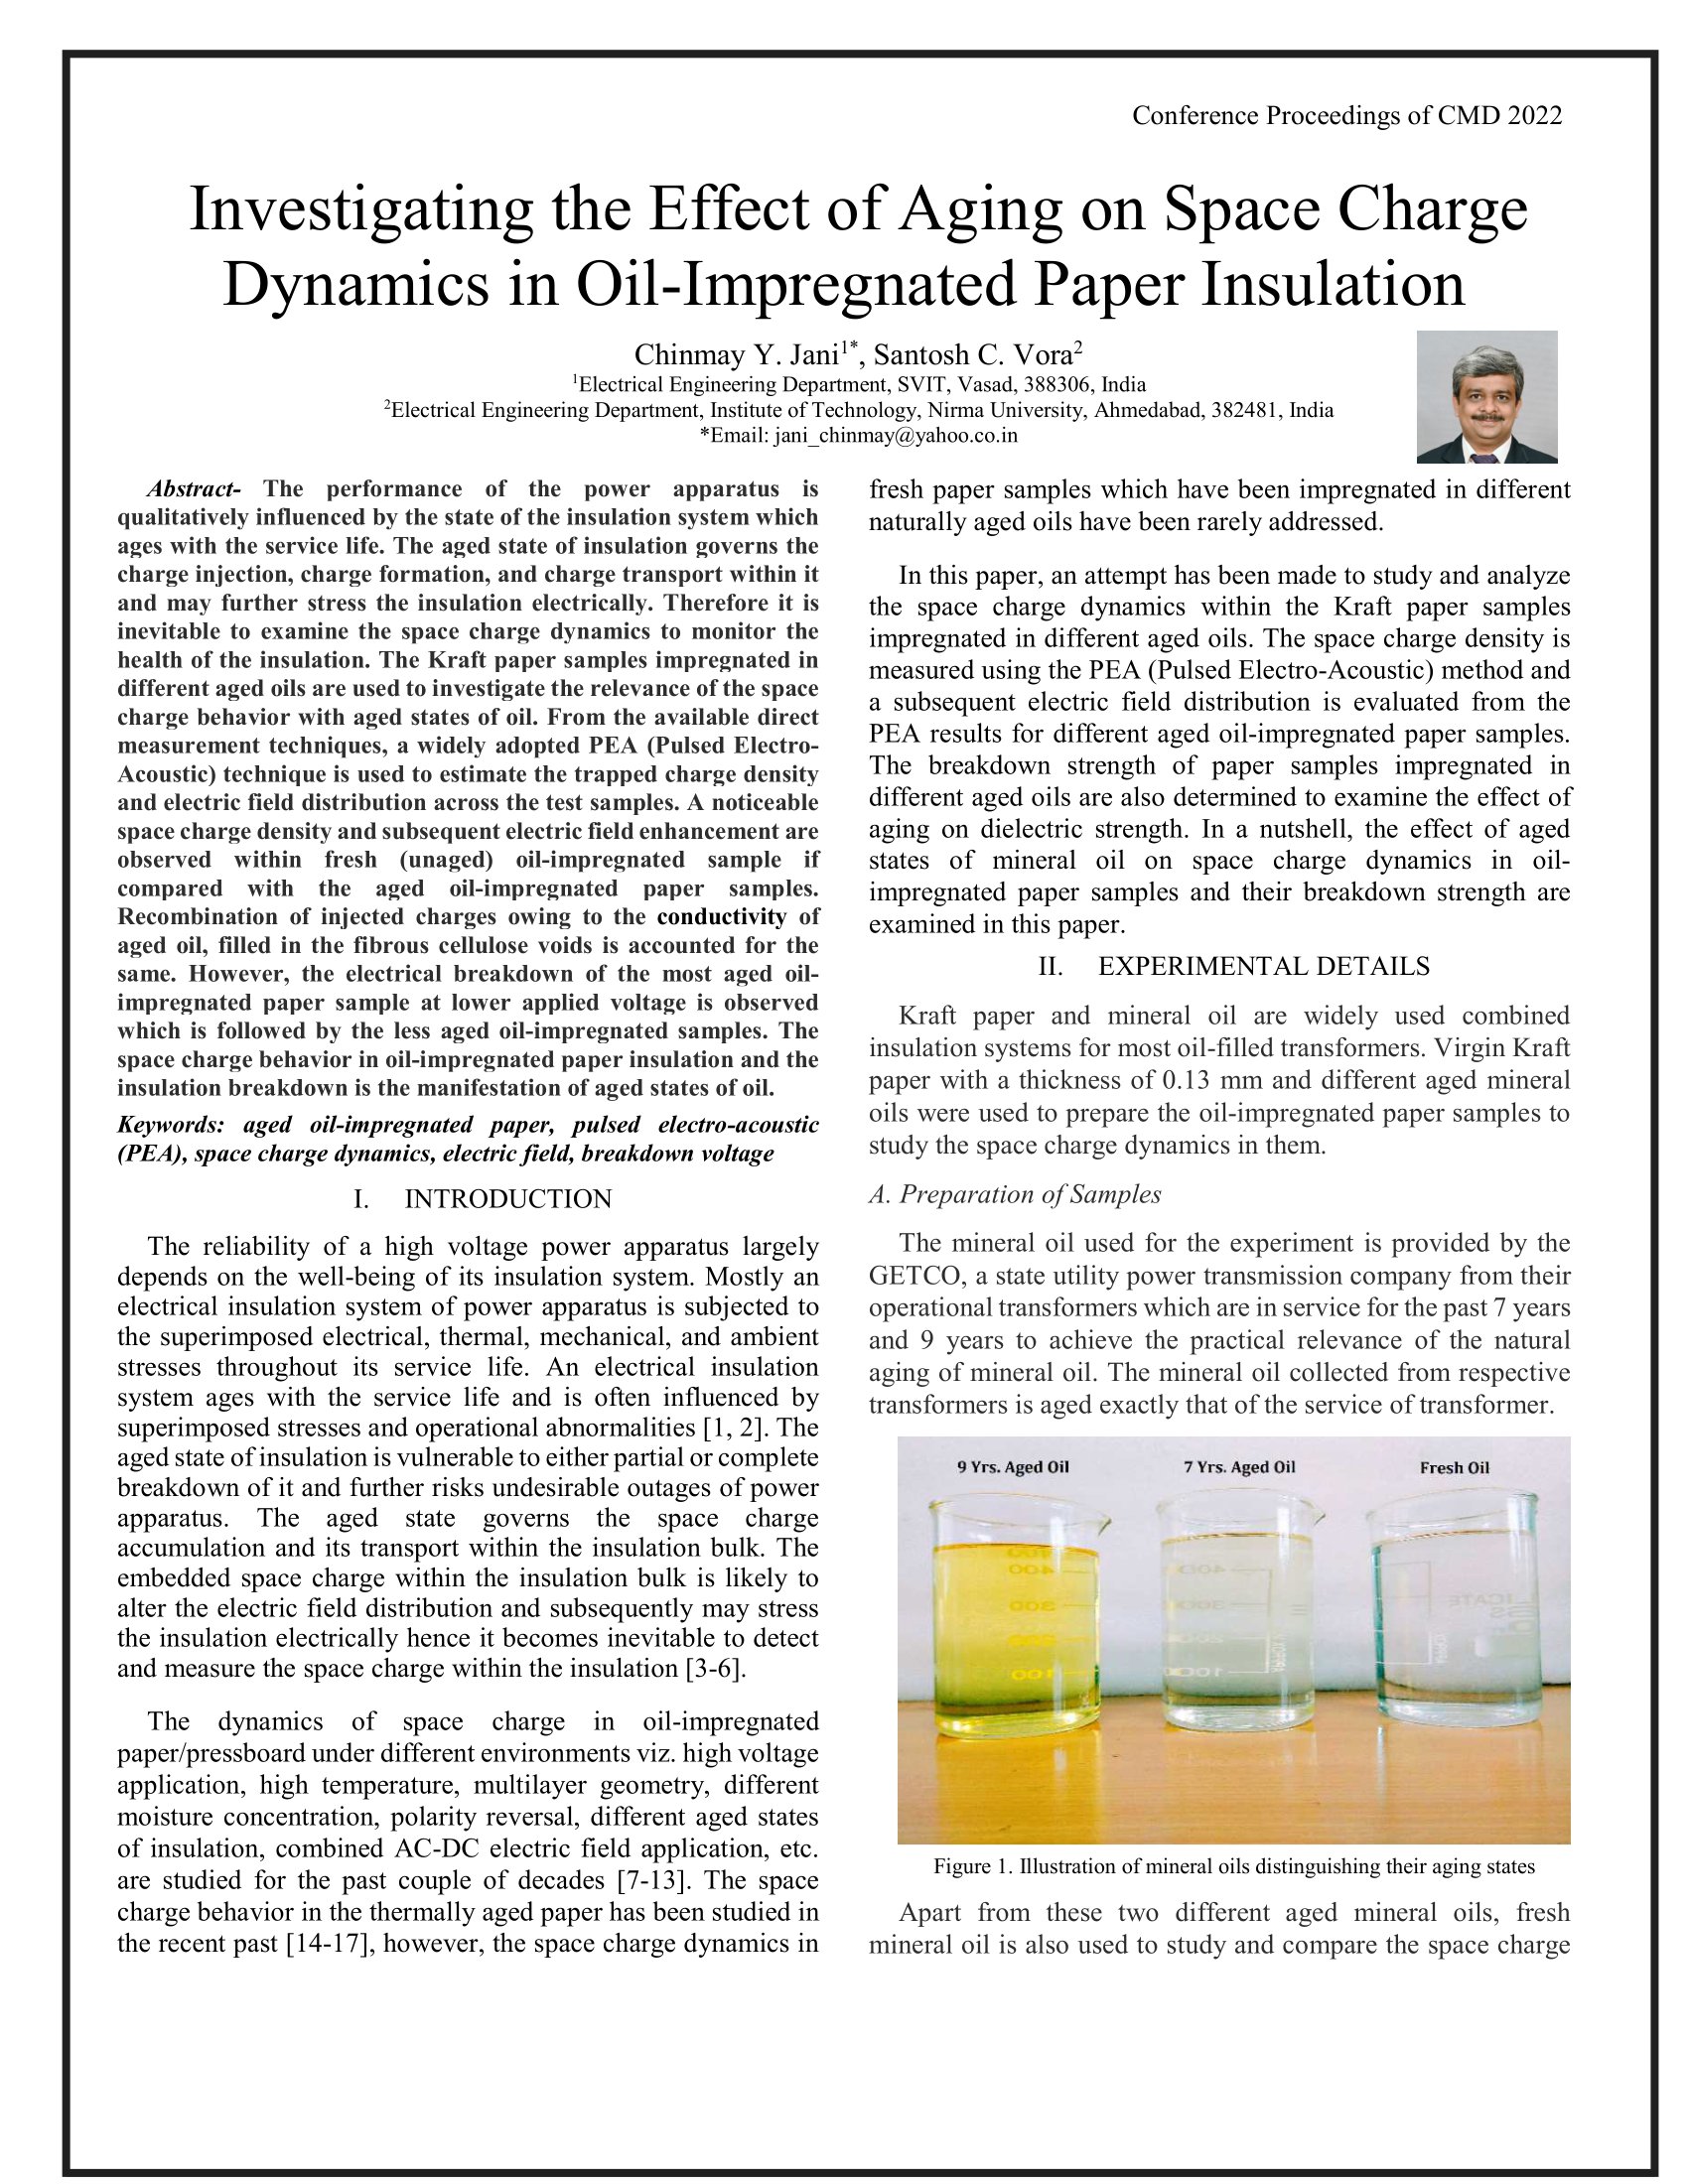 Investigating the effect of aging on space charge dynamics in oil-impregnated paper insulation